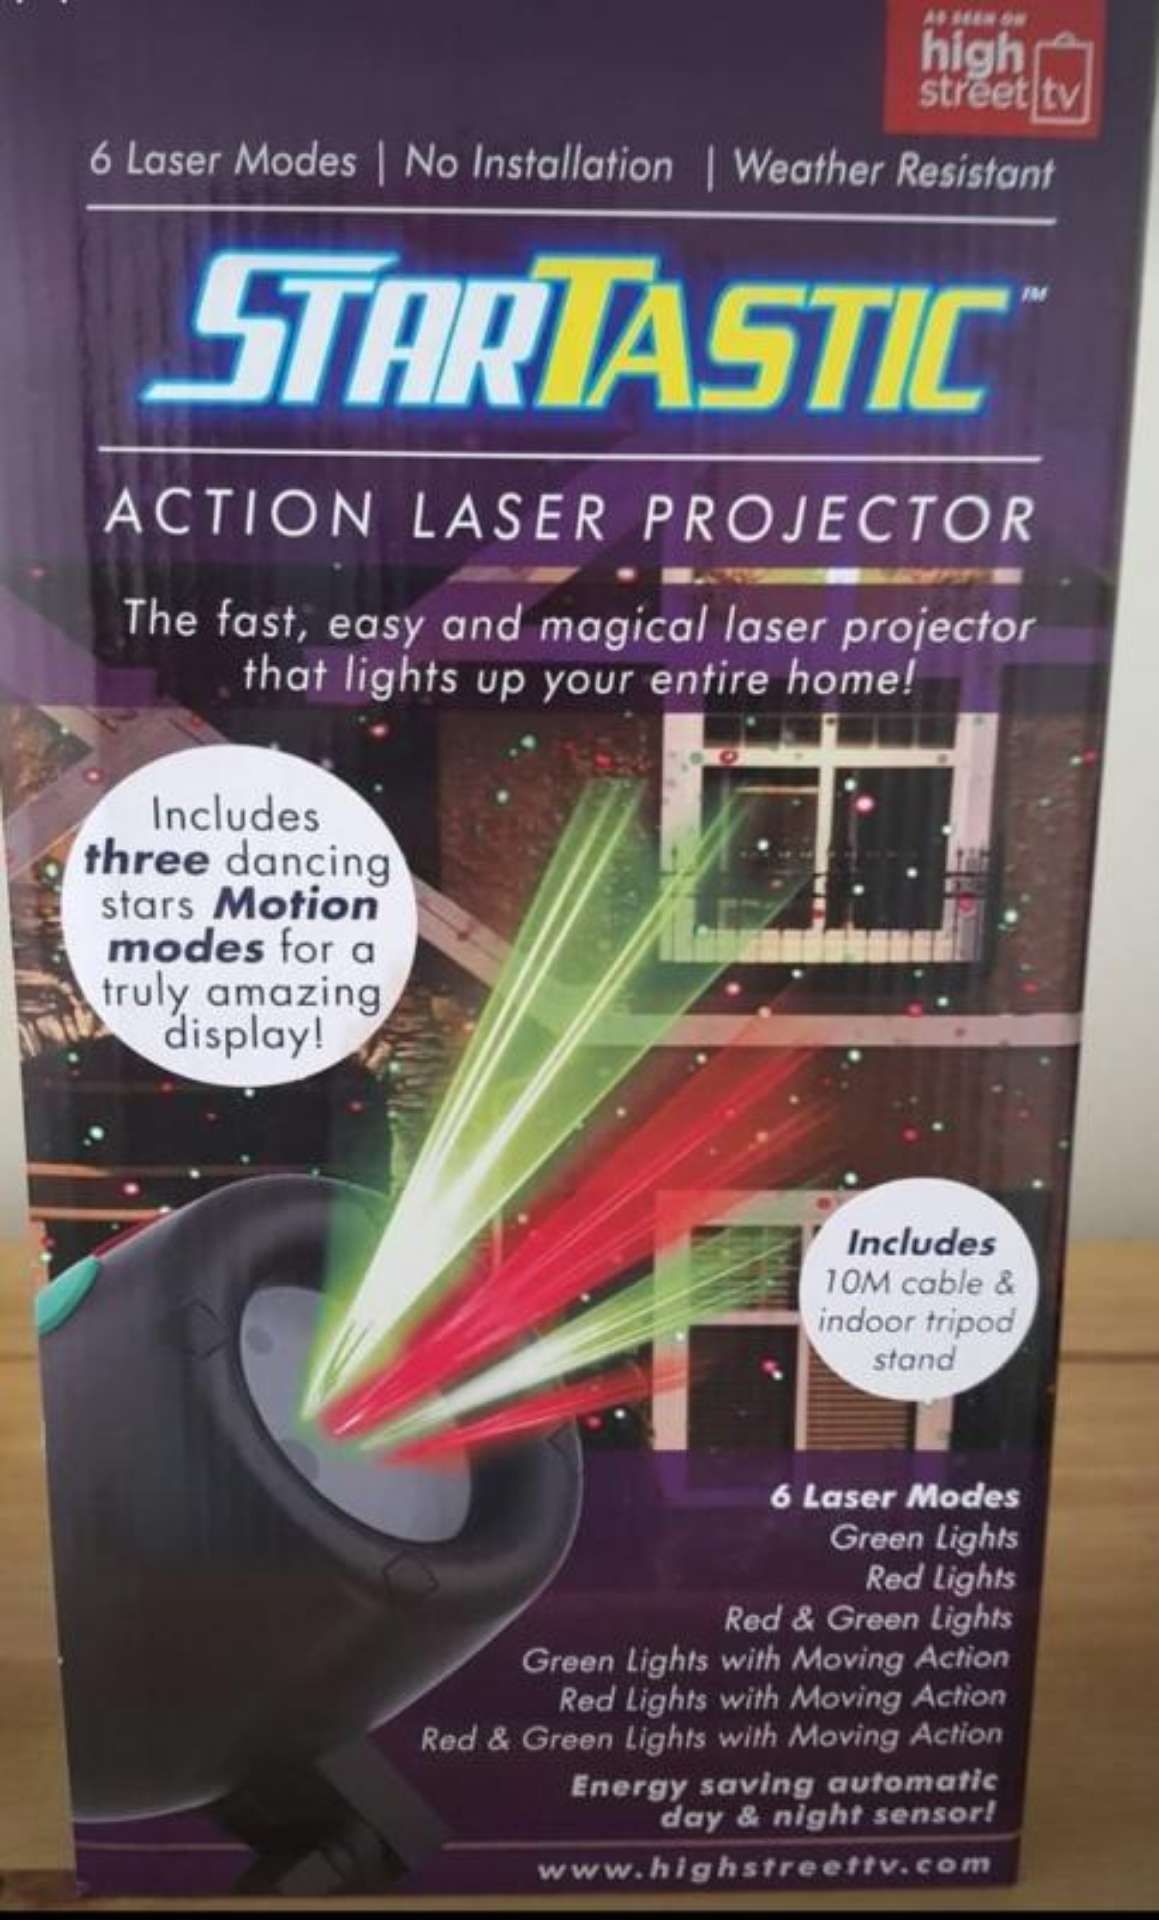 3 x StarTastic Motion Laser Projectors - Starry Light Display Suitable For Christmas, Weddings, - Image 2 of 4